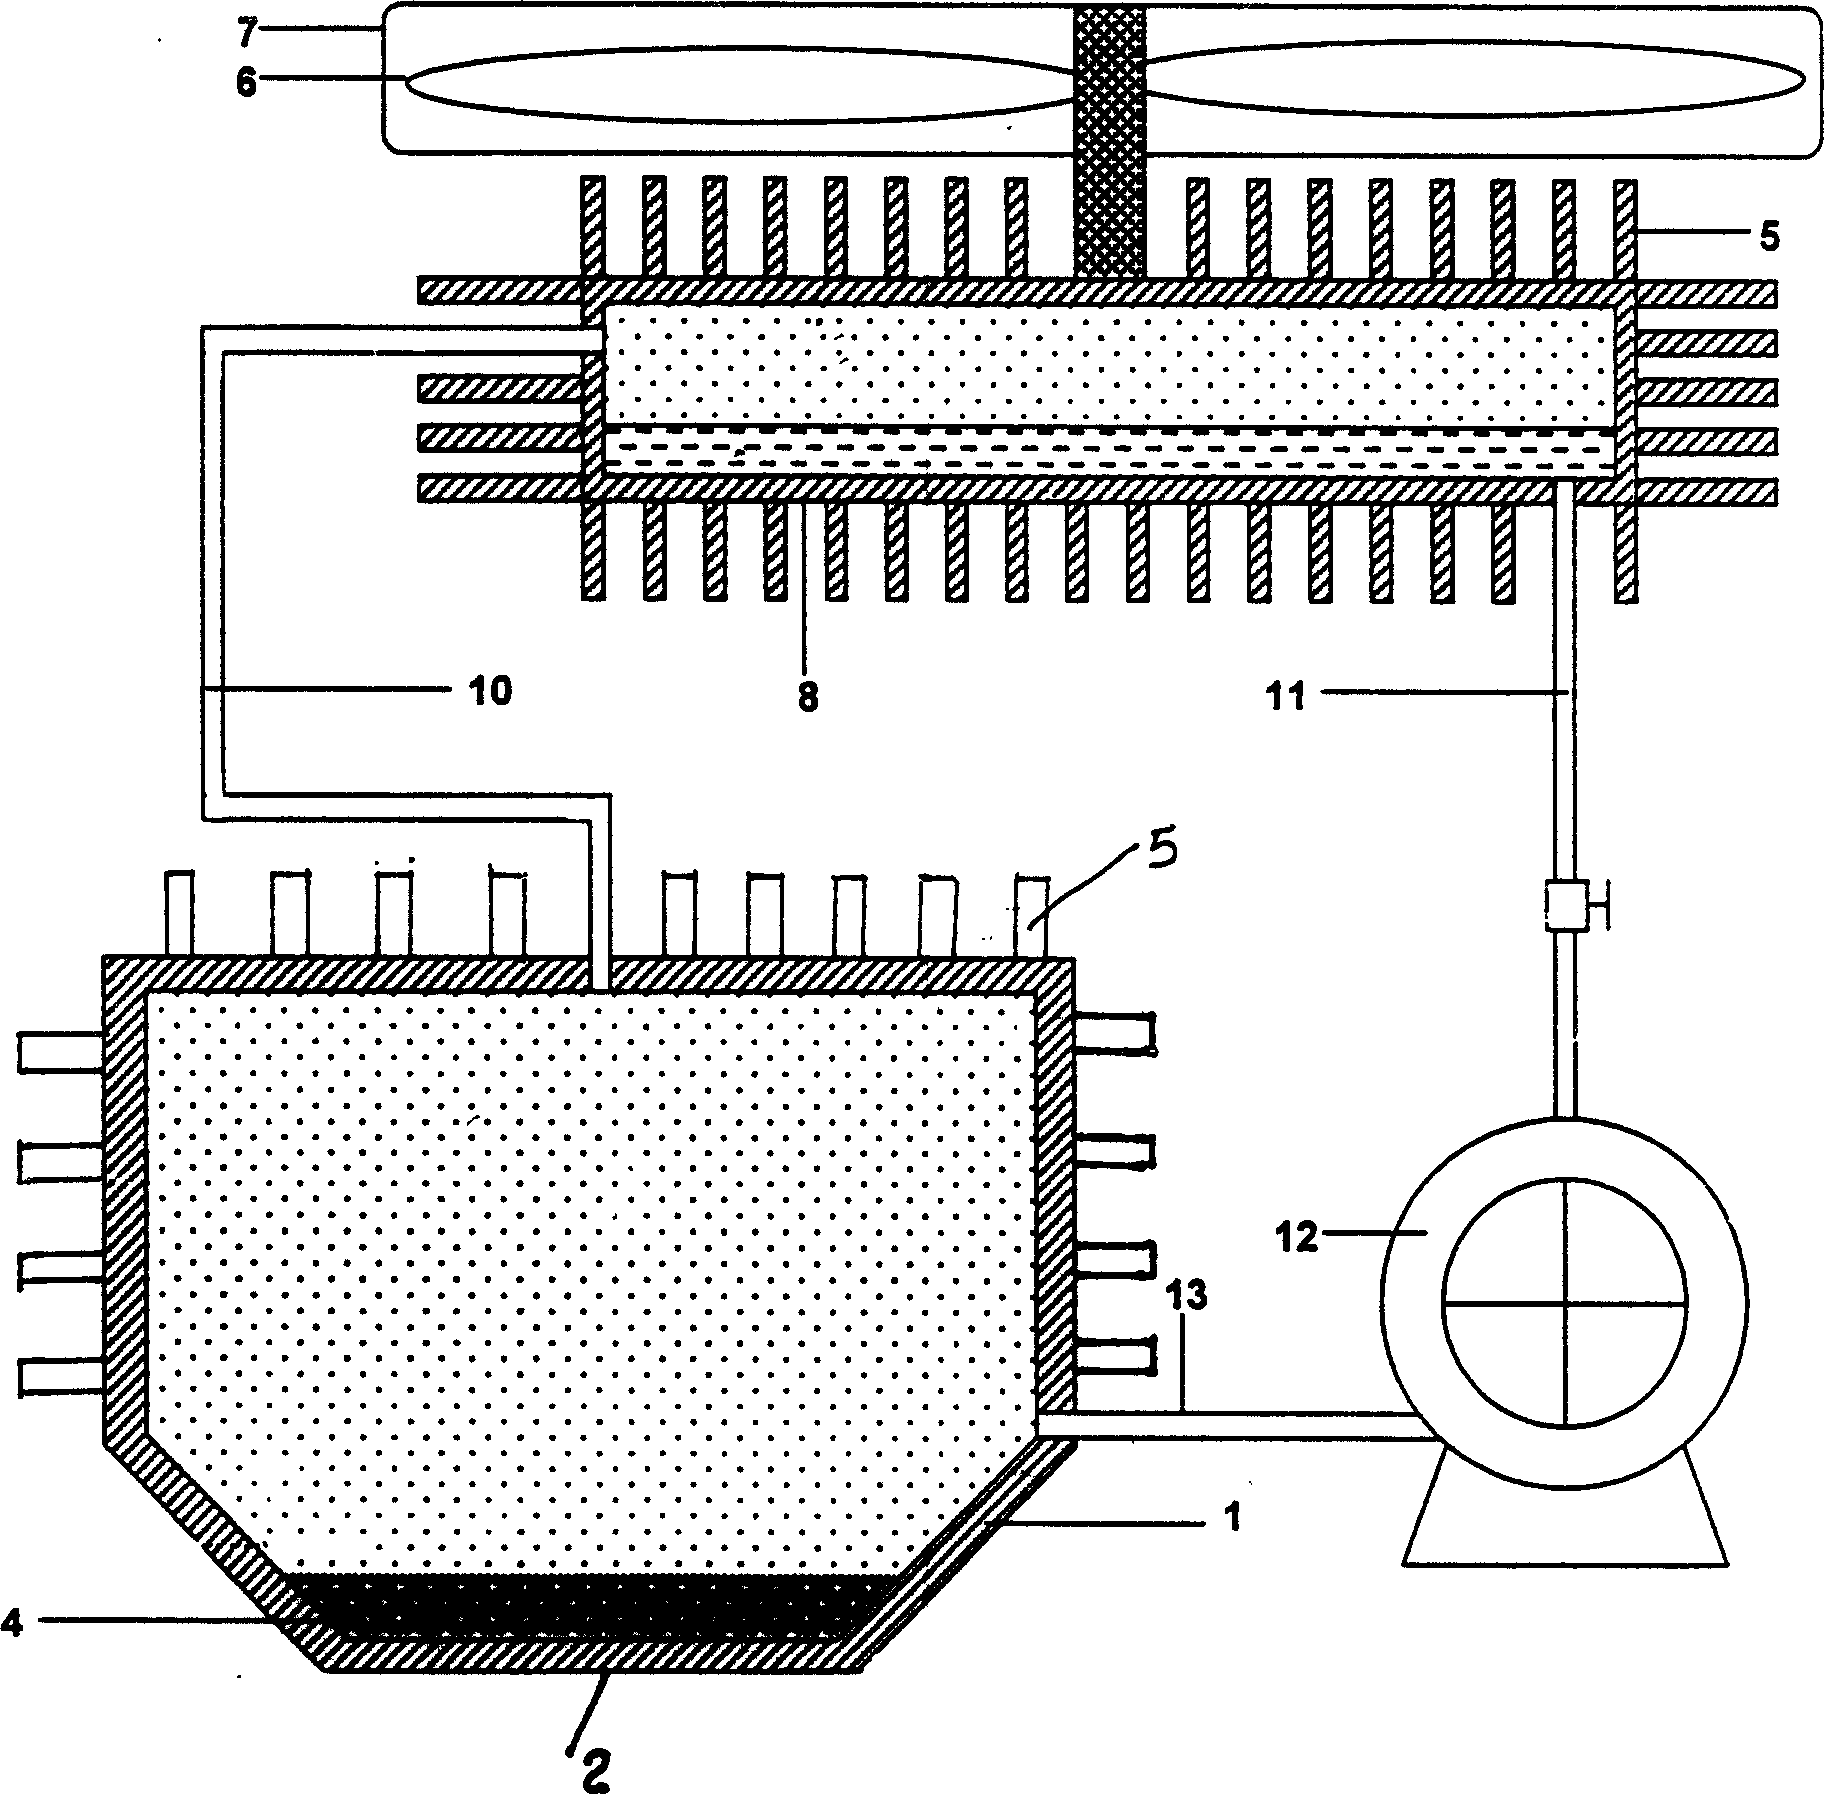 Solute-dissolving, temperature-reducing and cooling device for reducing computer chip temperature